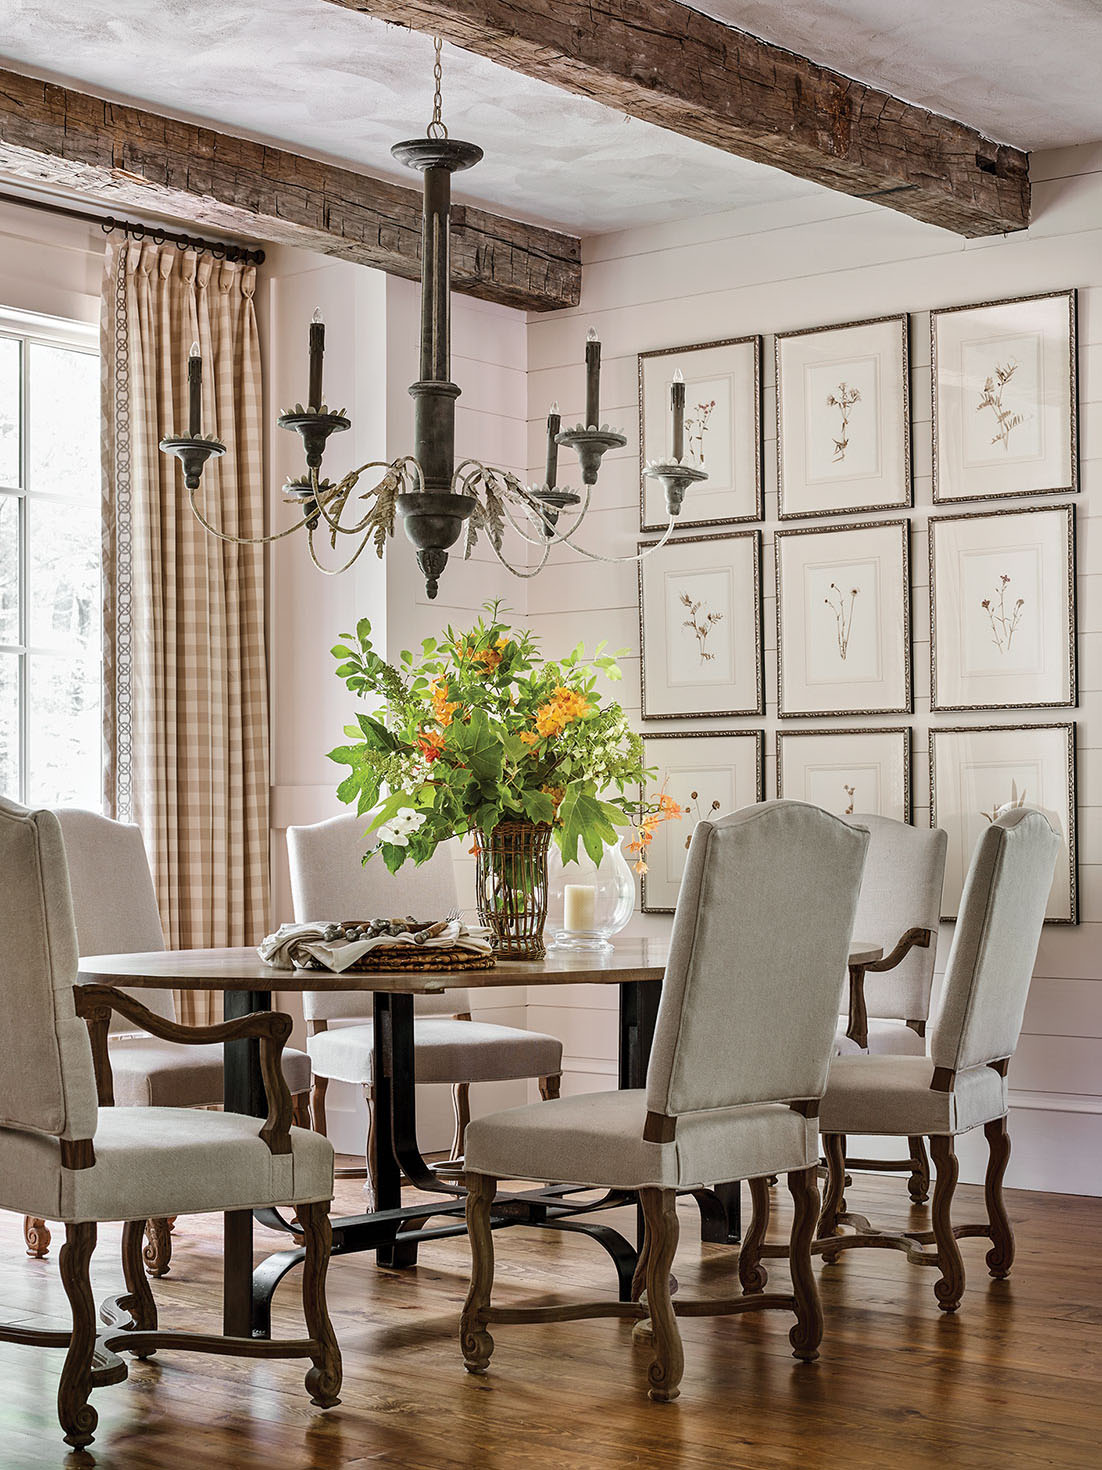 Mountain house decorating ideas to take away from this Francie Hargrove dining room include floor-to-ceiling curtain panels in a large gingham print in natural white and khaki. On the table is a loose, rustic floral arrangement of branches, including dogwood blooms, oak leaves, as well as a candle in a Simon Pearce hurricane.. The framed pressed flowers are hung in a large grid of 9 on one wall.